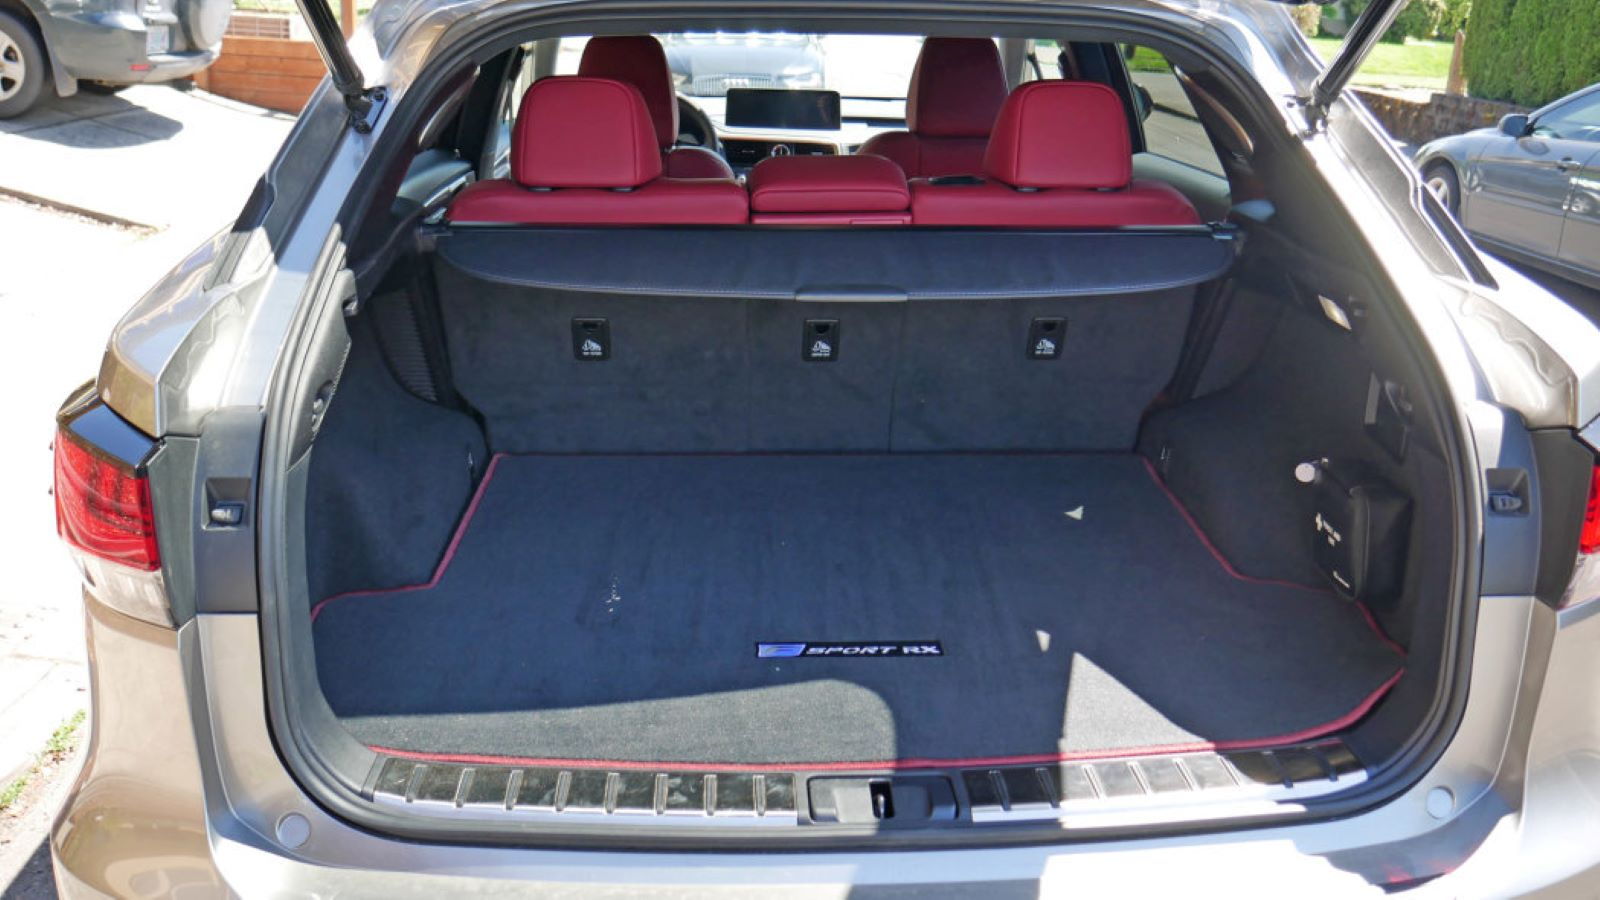 Lexus RX Holds Much More Luggage Than You Might Think Clublexus